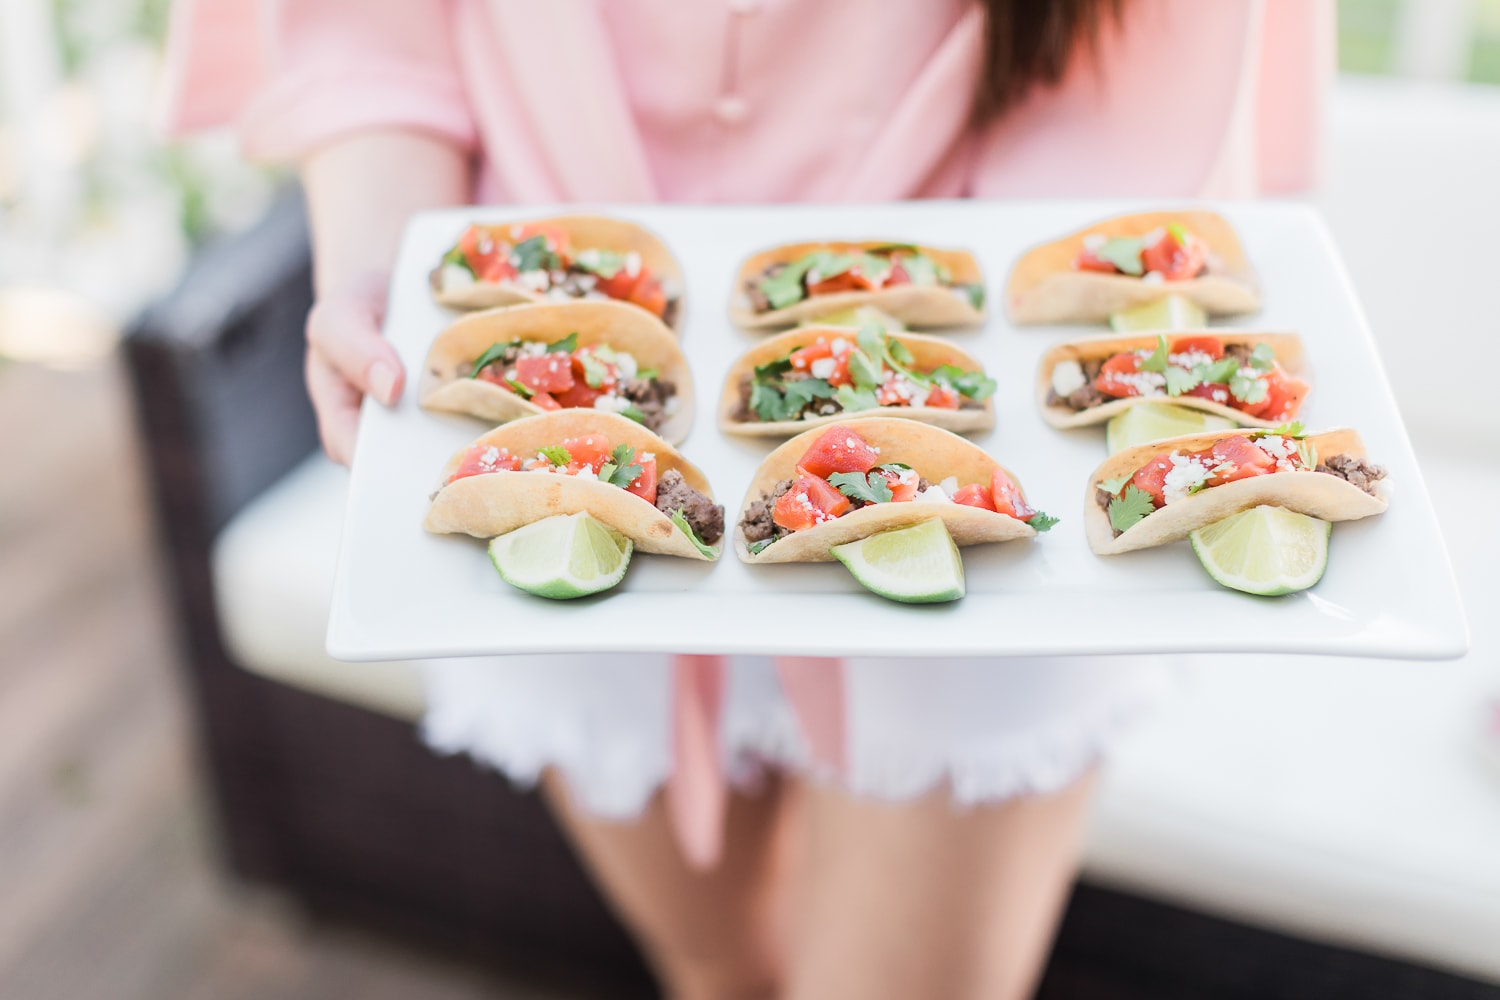 Blogger Stephanie Ziajka shares ideas for what to serve with beef tacos on Diary of a Debutante